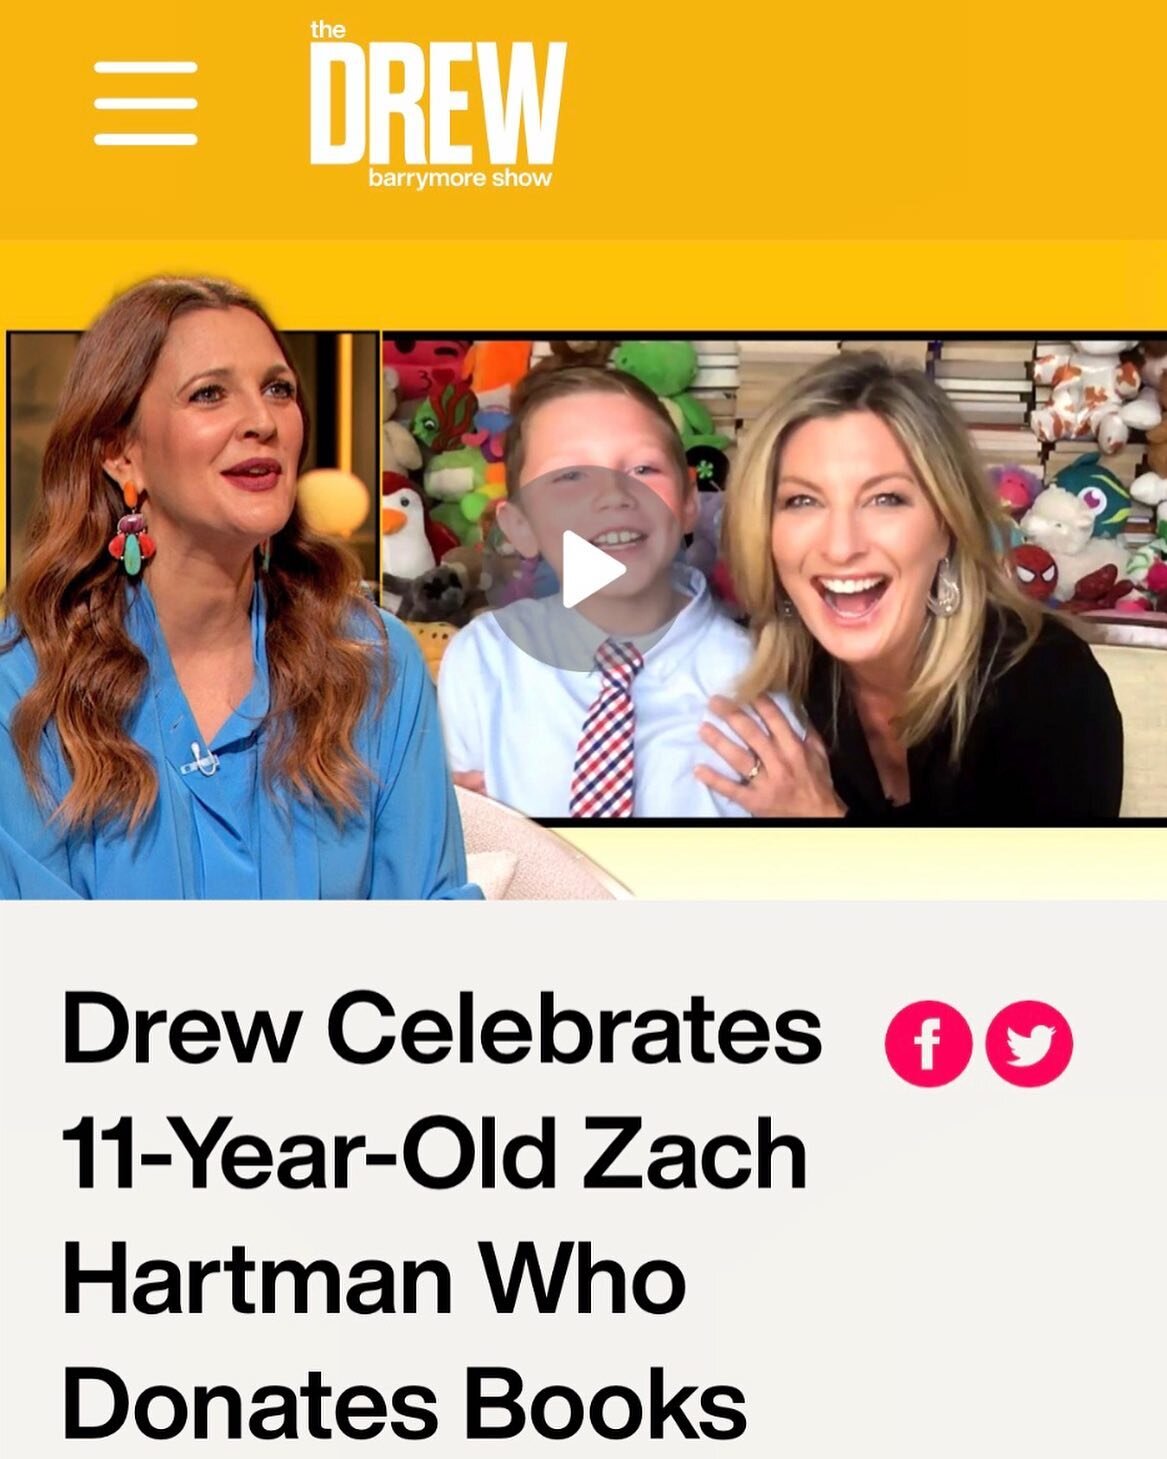 &quot;You can make a difference at any age.&quot;

Drew Barrymore talks with 2020 Eco-Hero Award Winner Zach Hartman, who gathers books and toys for children in need and has helped donate 68,000 items so far, and surprises him with a $5,000 for his c